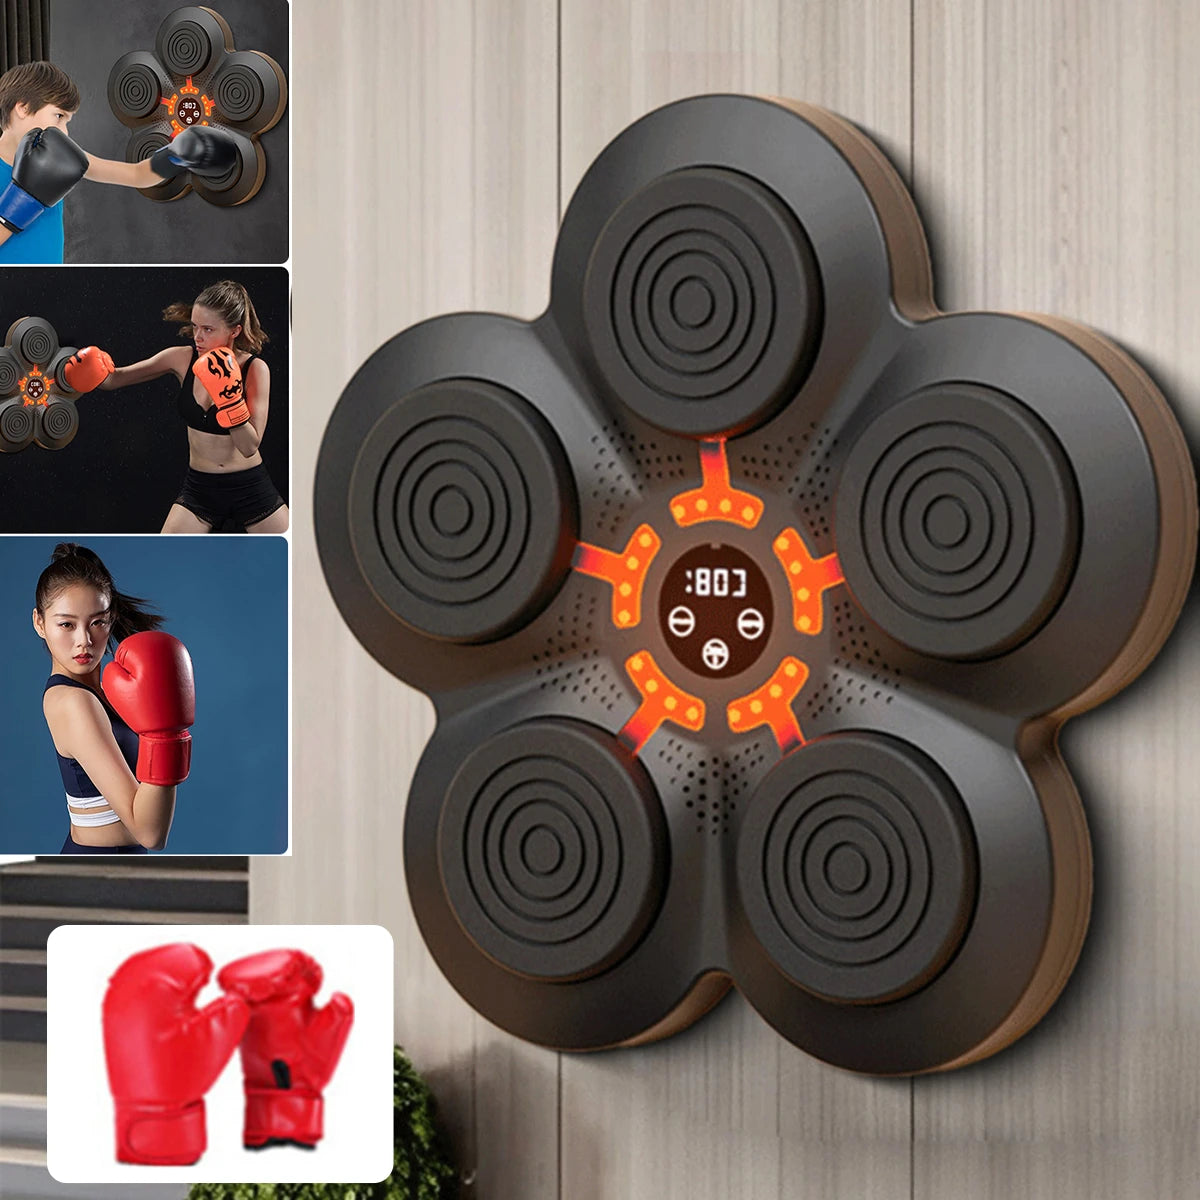 LED Smart Music Boxing Trainer: Interactive Wall-Mounted Target with Light & Sound - Engaging Reaction Training for Kids & Adults